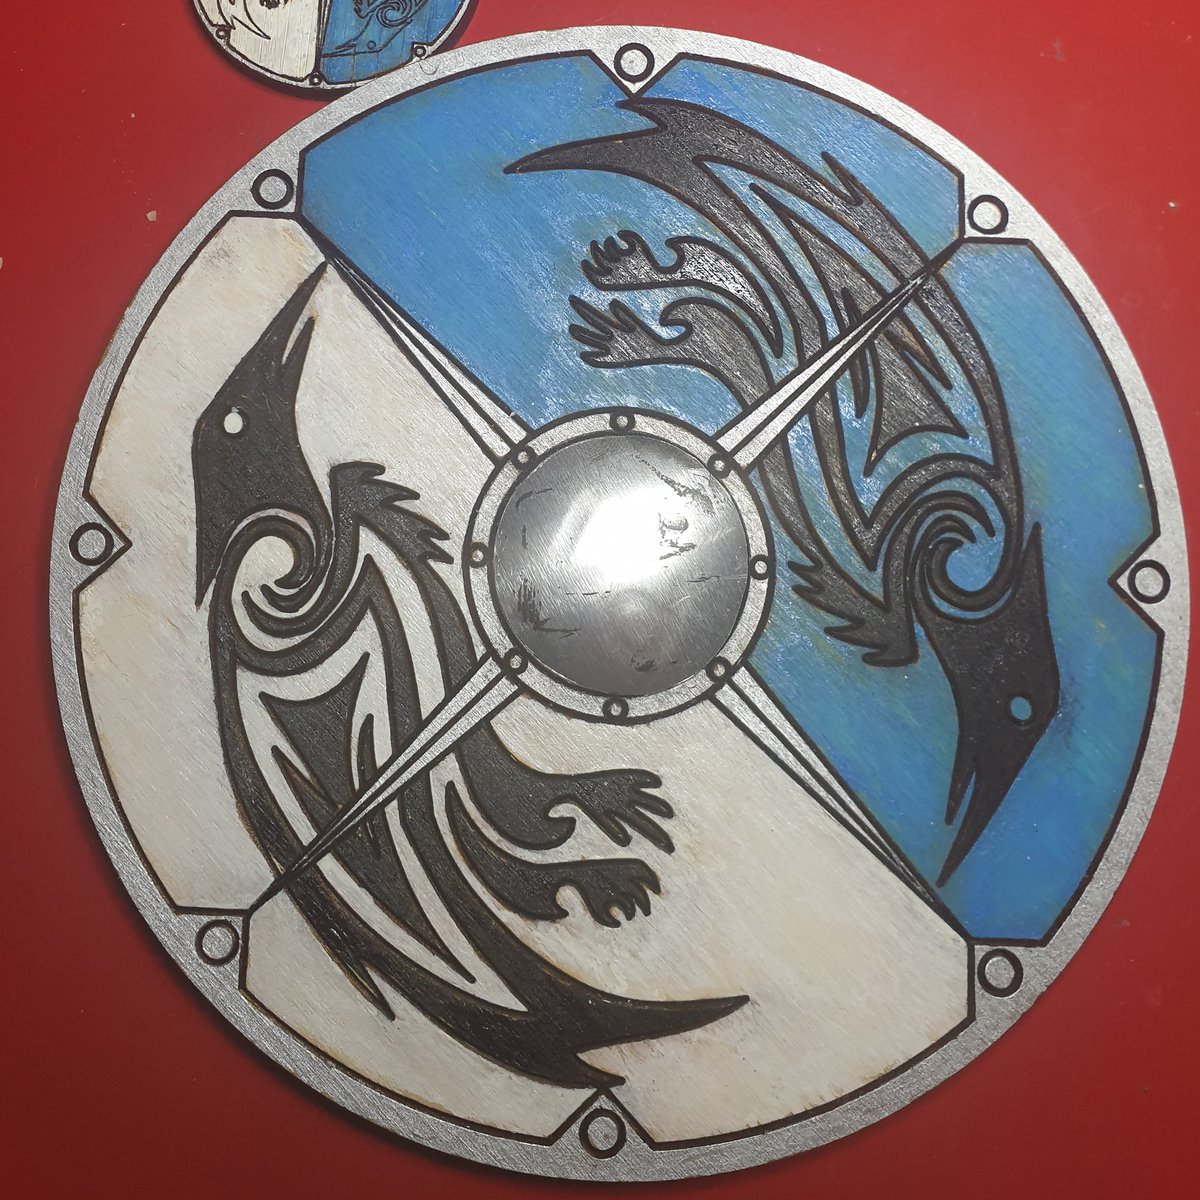 This week @foxybadgercosplay released a clean version of one of the shields seen in the AC:Vallhalla trailer and I just had to give lasering it a shot! 5mm ply with a soda can boss, painted with oil paint pens! 
#ParalianLaser #laserengraved #lasercut #uk